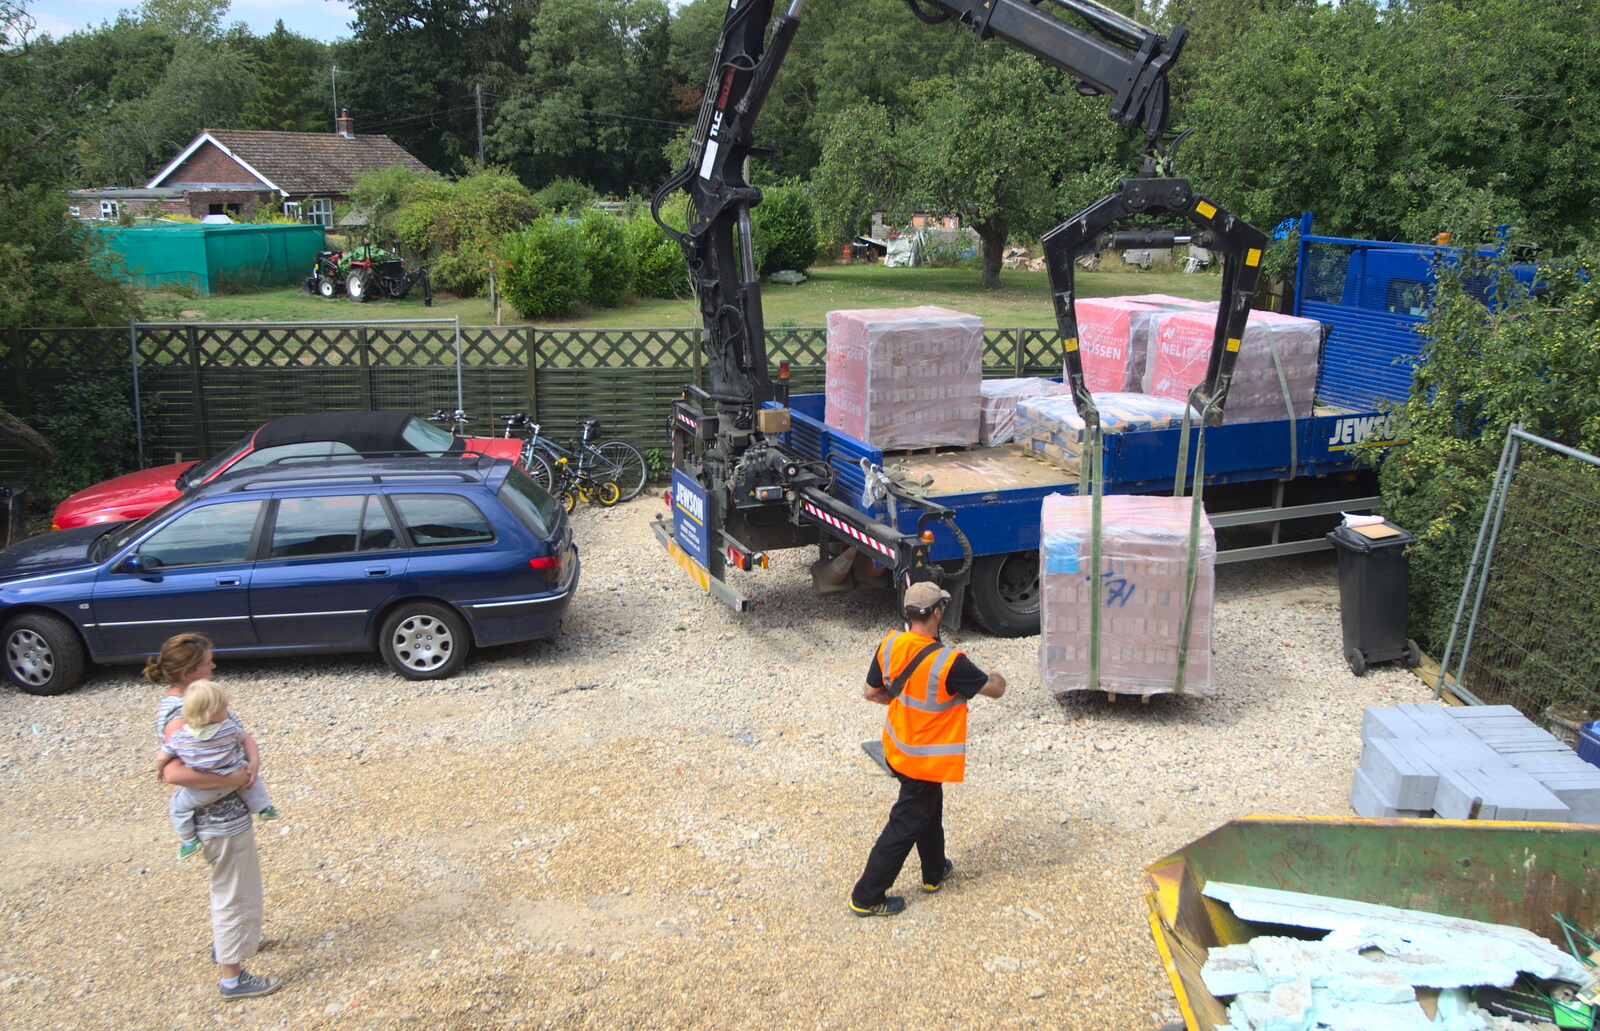 A pallet of bricks is unloaded from A Giant Sand Pile, and a Walk at Thornham, Suffolk - 17th August 2013